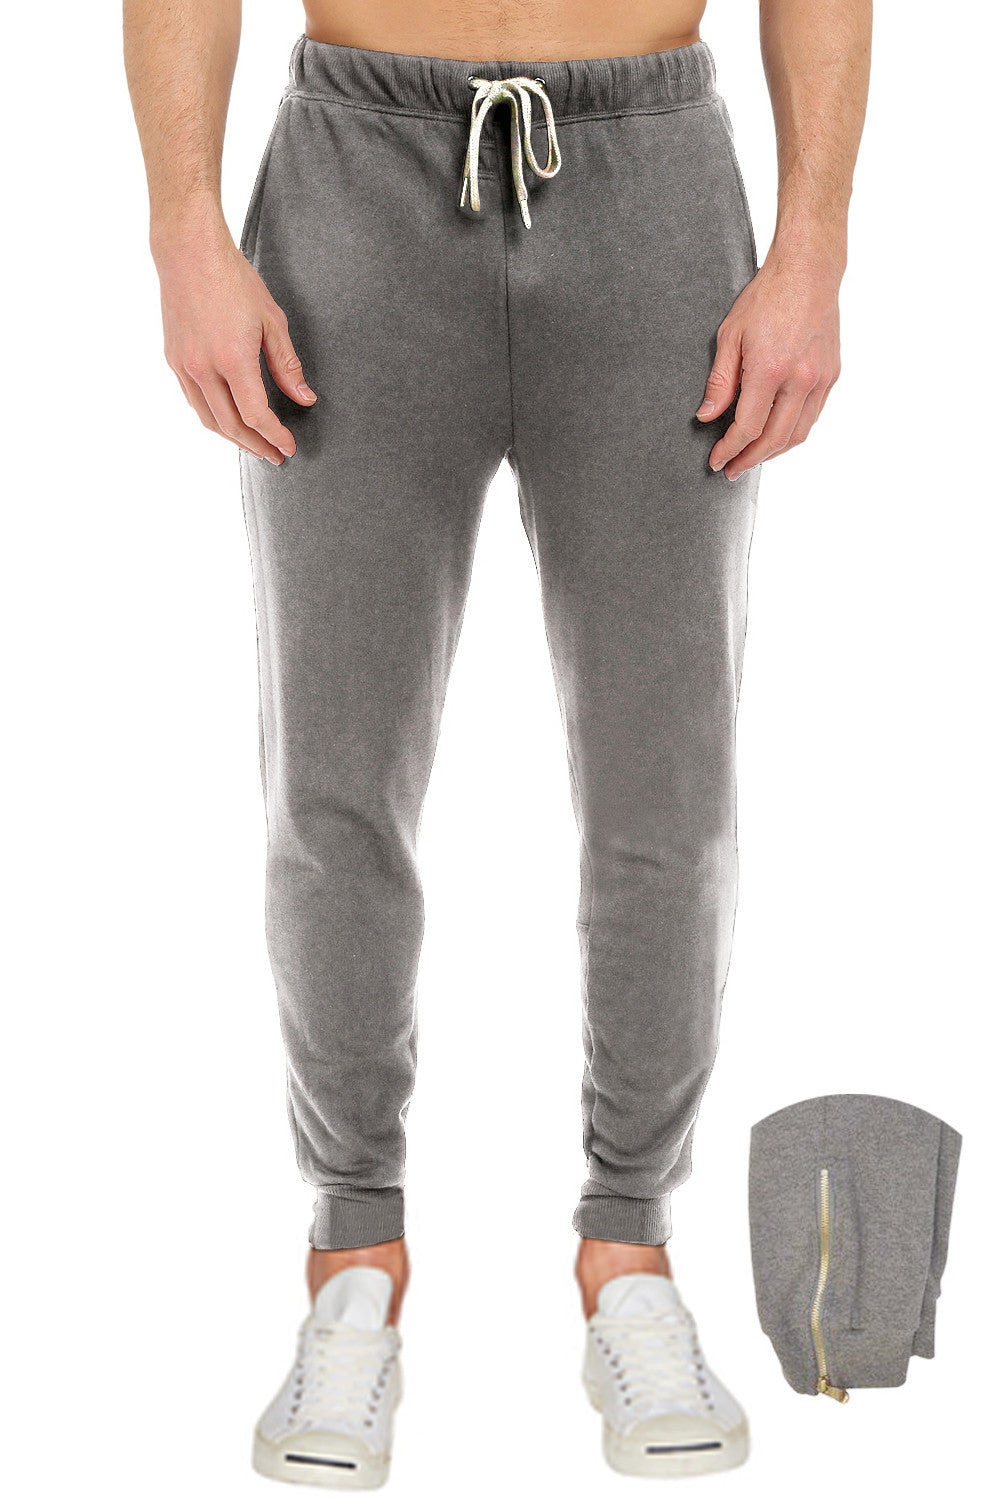 French Terry Heather Grey Pants with Zipper: Easy wear Pro 5 fleece bottoms for comfort & warmth. Elastic waist/ankle, leg zipper for shoe-friendly wear. Available Sizes S-XL, colors: Black, Grey, Camo. 60% Cotton 40% Poly.